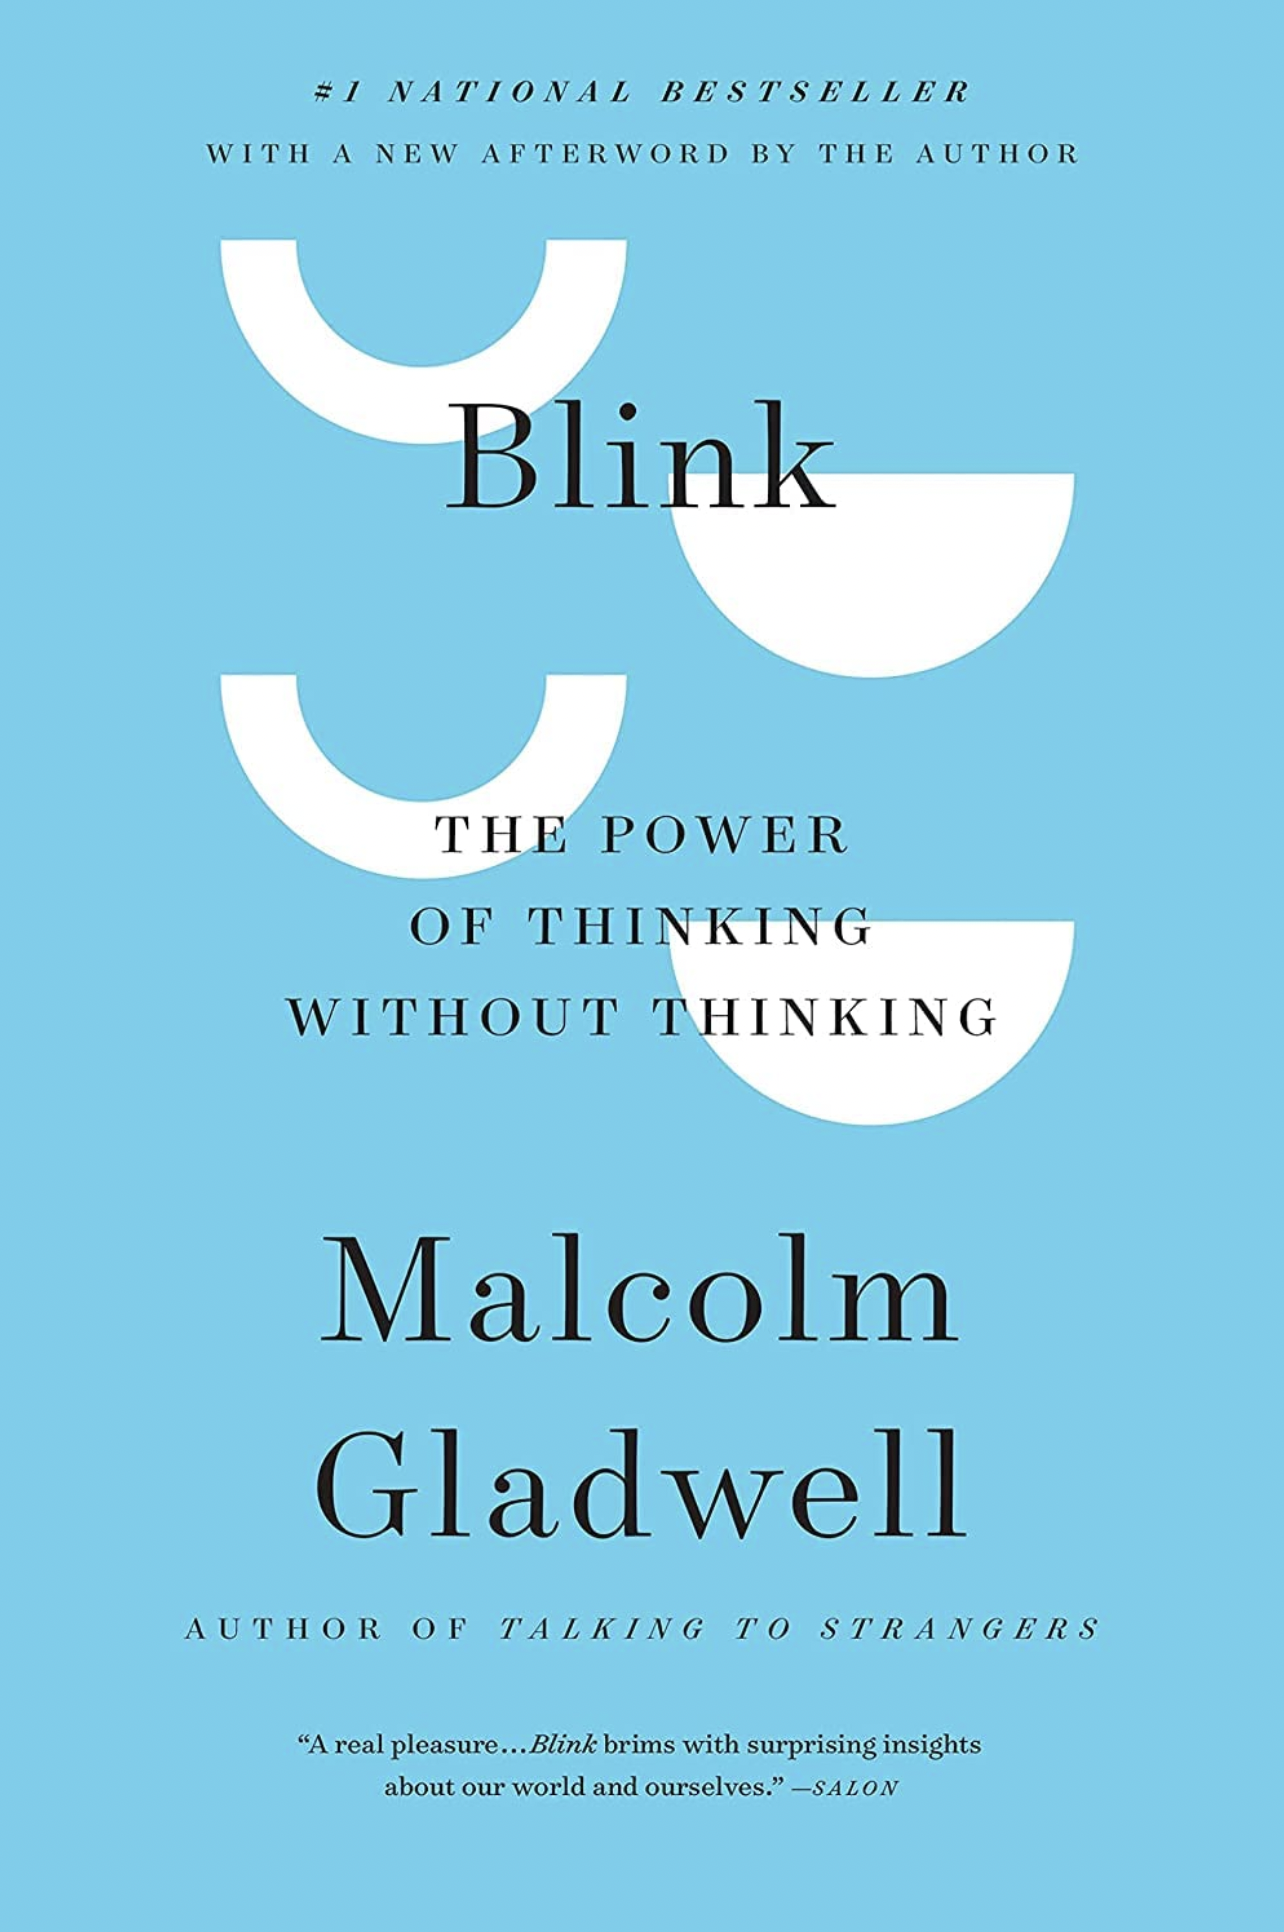 Blink The Power of Thinking Without Thinking by Malcolm Gladwell